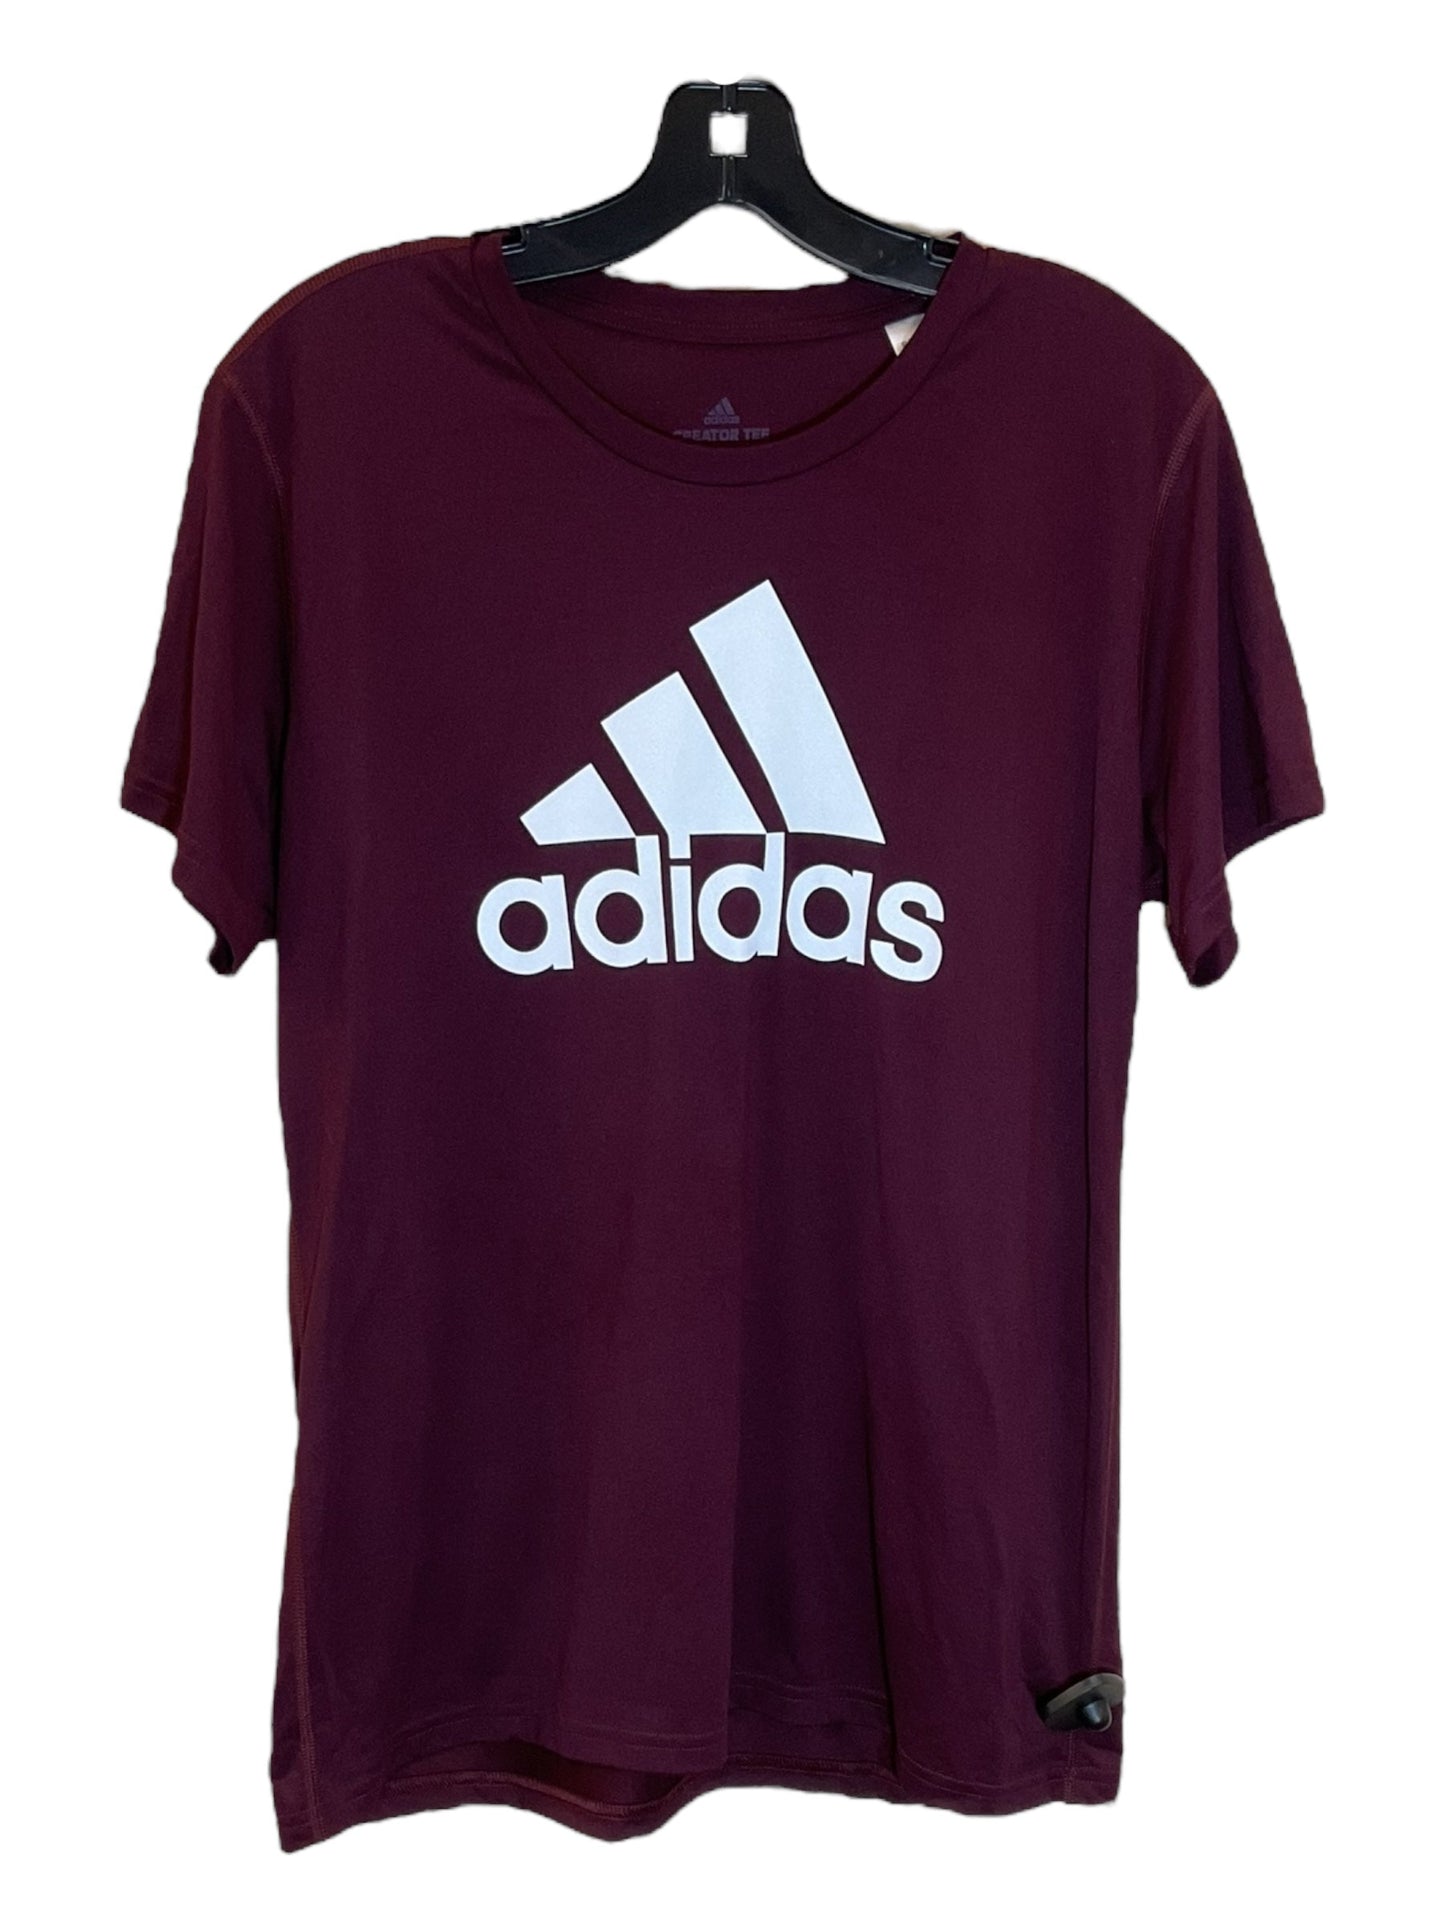 Red Athletic Top Short Sleeve Adidas, Size Xl